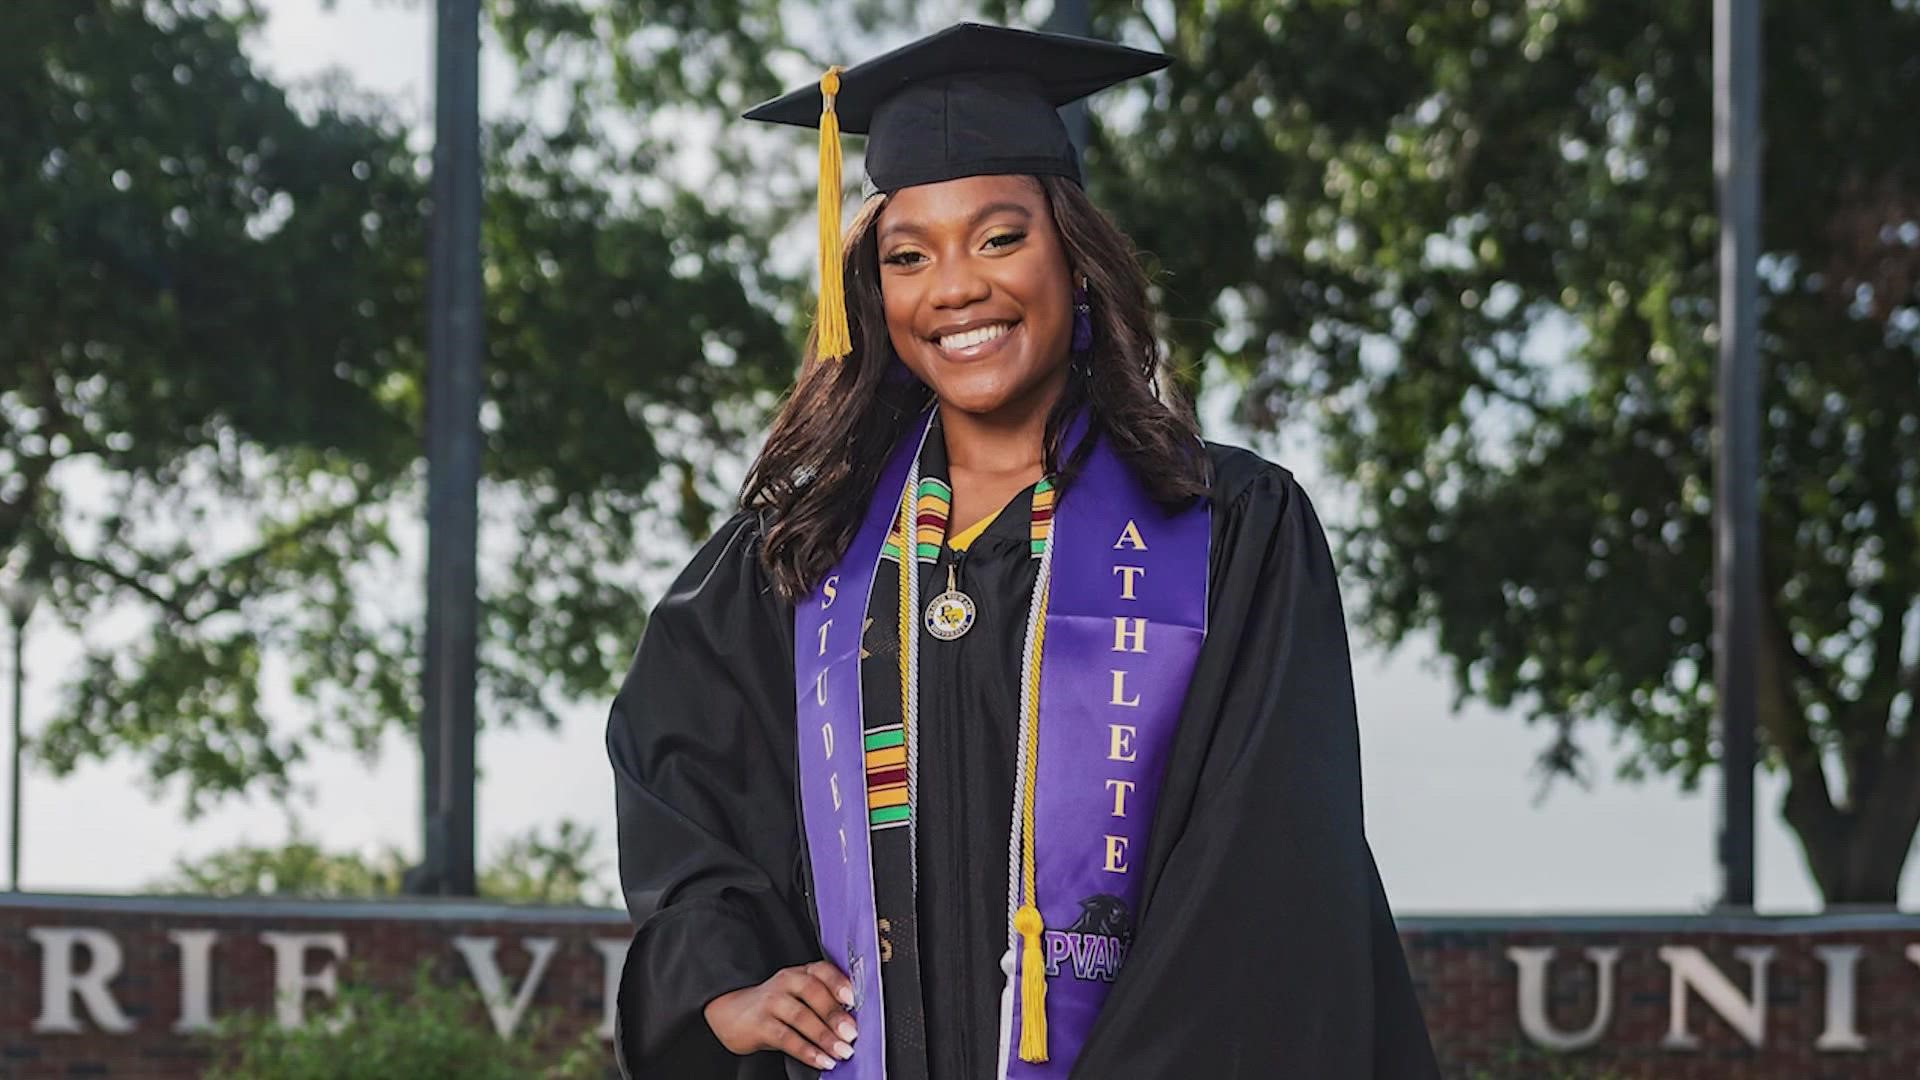 At age 24, the Booker T. High and PVAMU grad is now a consultant, master's student, and a baseball coach and umpire. She credits her community for her success.